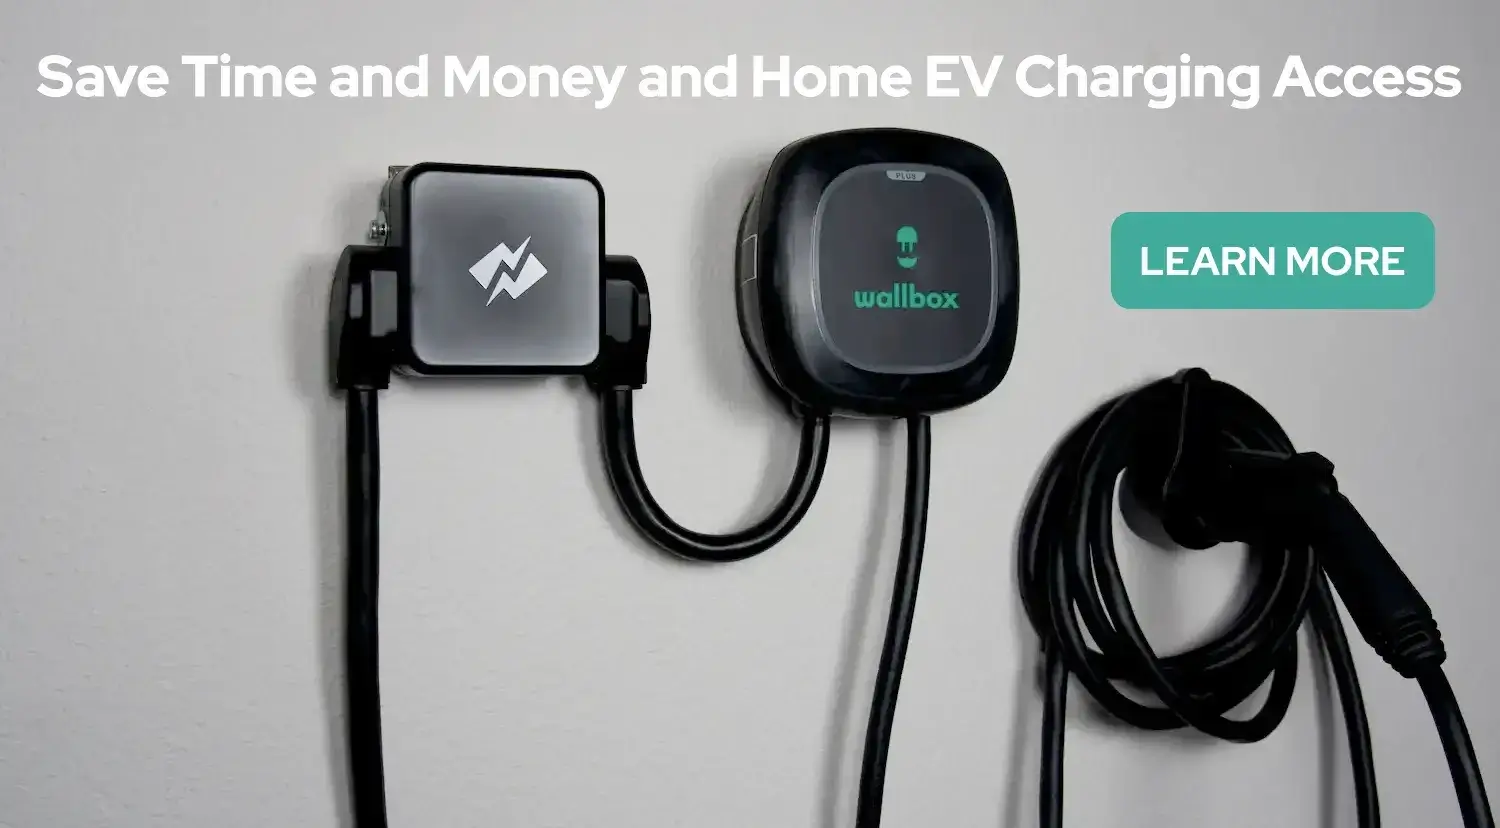 240V Smart Splitter for dual EV charging at home. Great to pair with your Level 2 EVSE like a Wallbox Pulsar Plus, Chargepoint Home, or even the Tesla Mobile Connector that comes with your electric car.